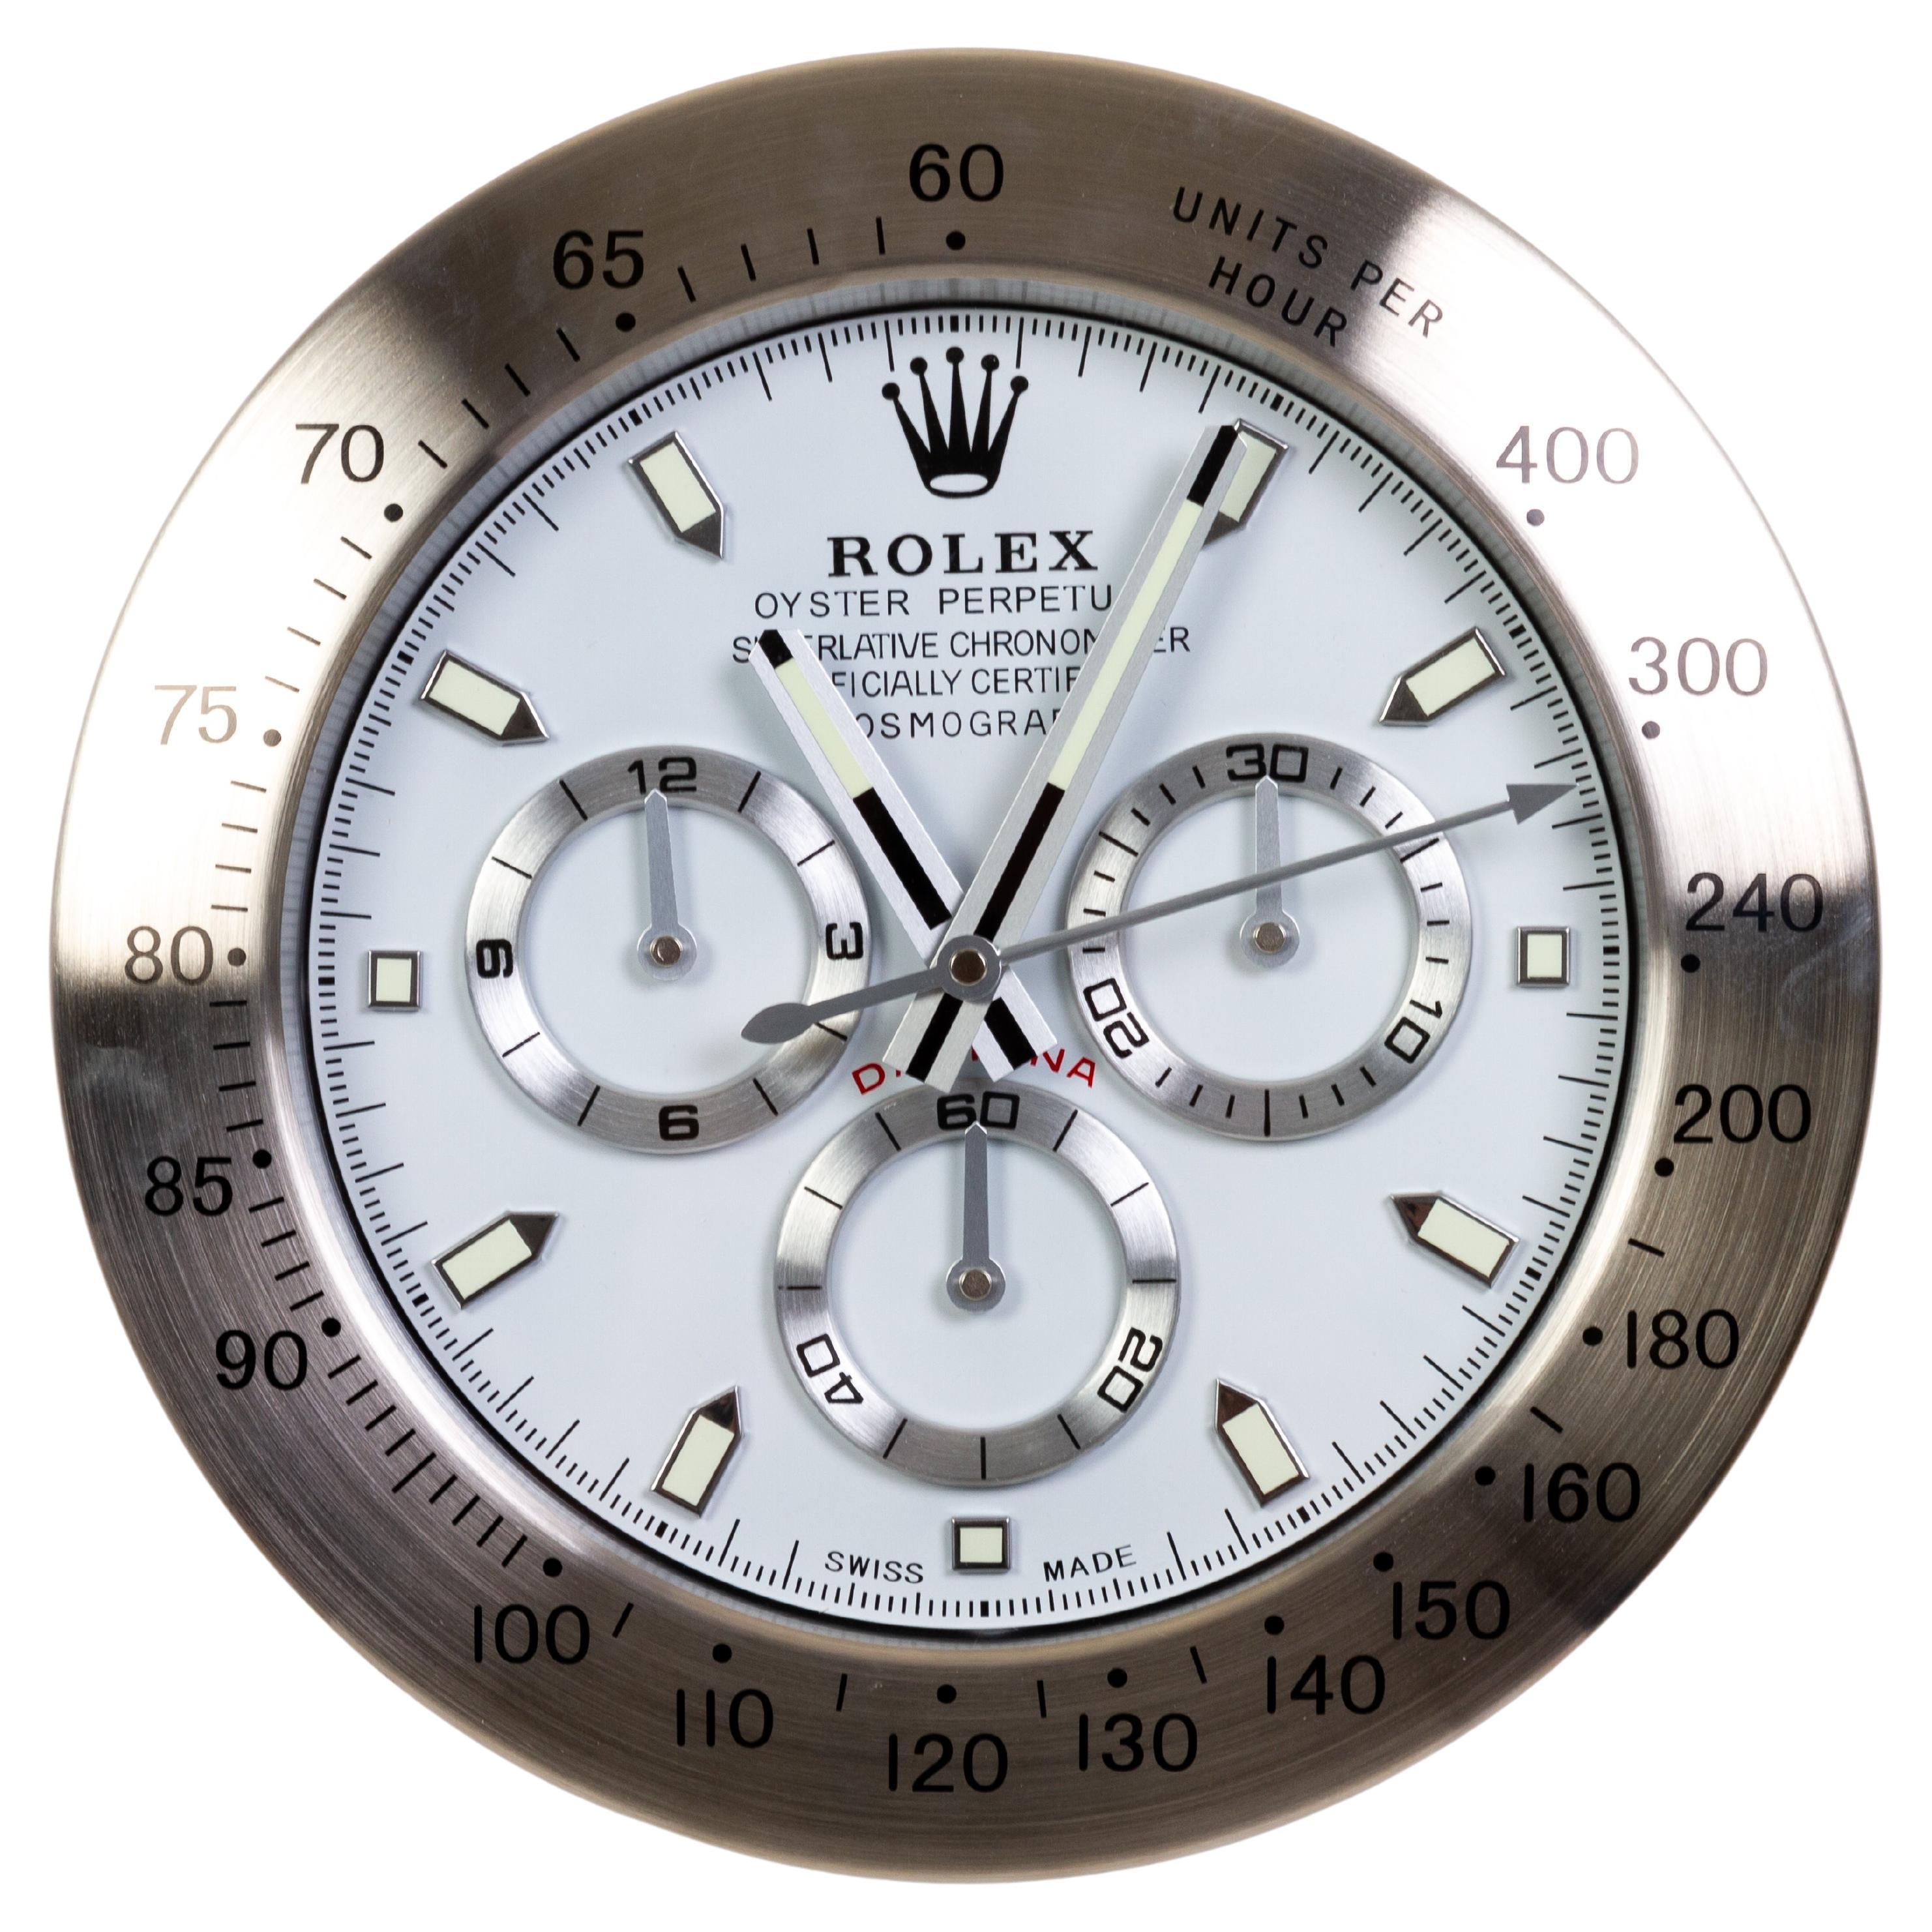 ROLEX Officially Certified Perpetual Cosmograph Wall Clock Watch at 1stDibs  | original rolex wall clock, rolex daytona wall clock, rolex clock wall